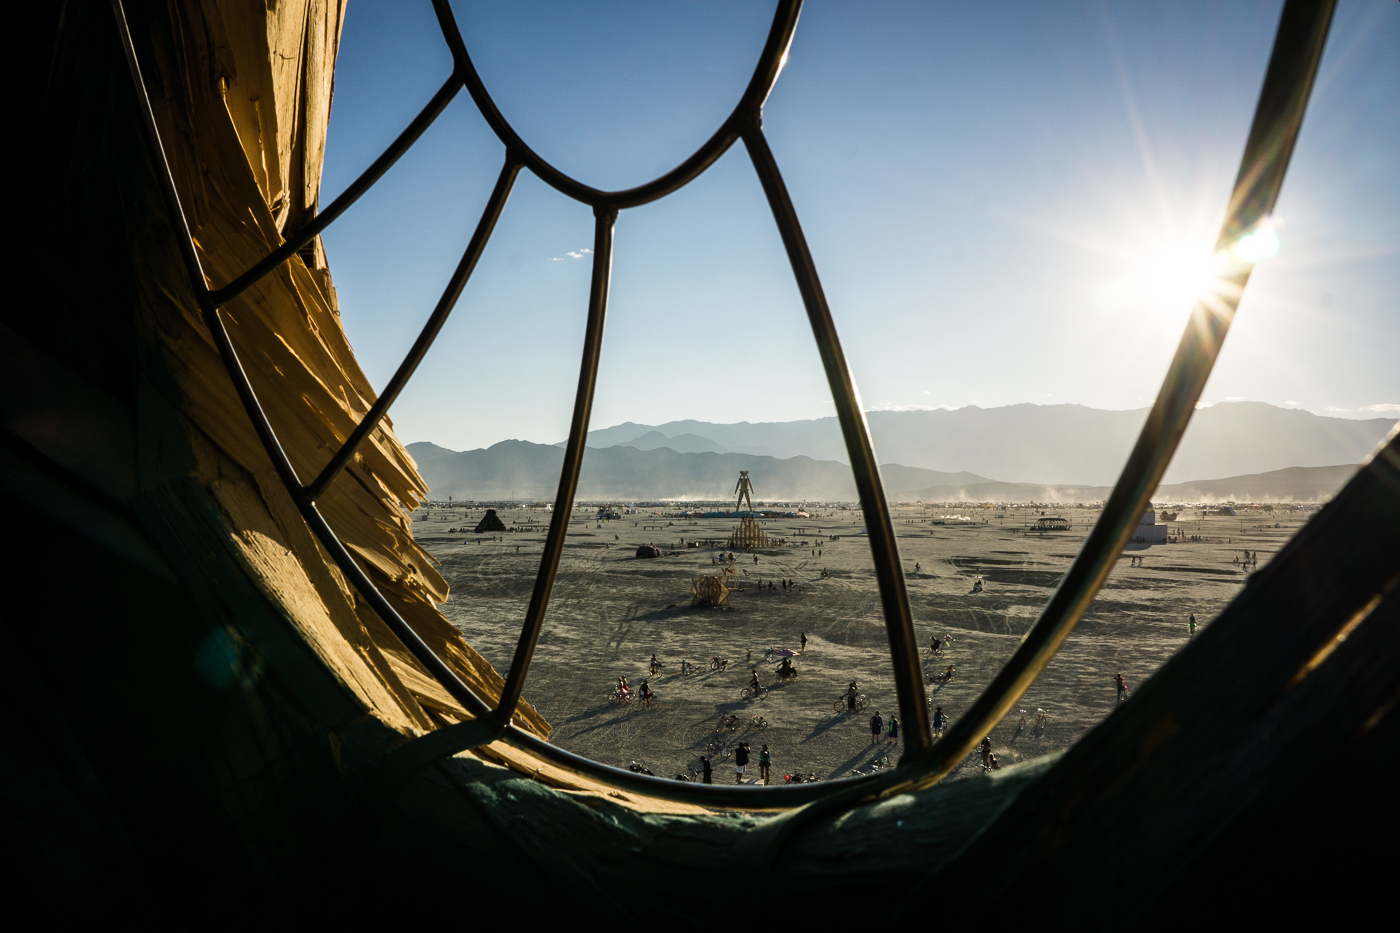 View of the Man from Embrace, Burning Man 2014: In Dust We Trust - Photos of a Dusty Playa